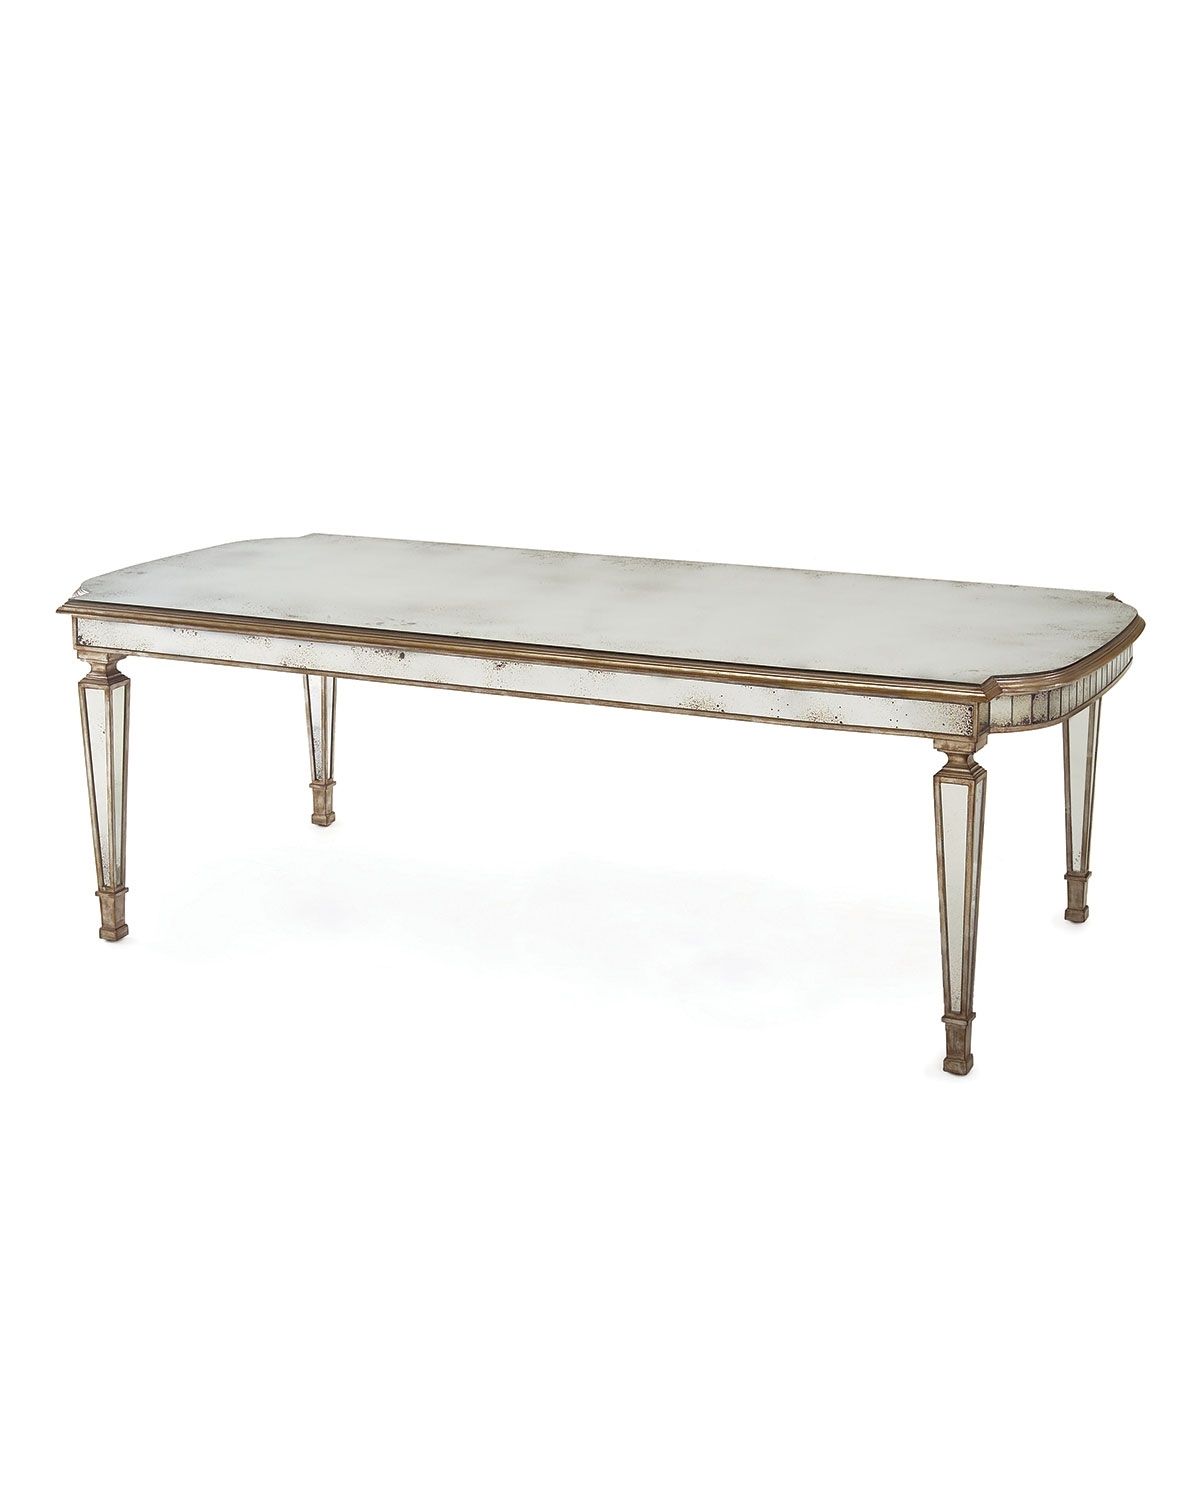 Trendy John Richard Collection Eliza 72"l Antiqued Mirrored Dining Table Regarding Antique Mirror Dining Tables (View 19 of 25)